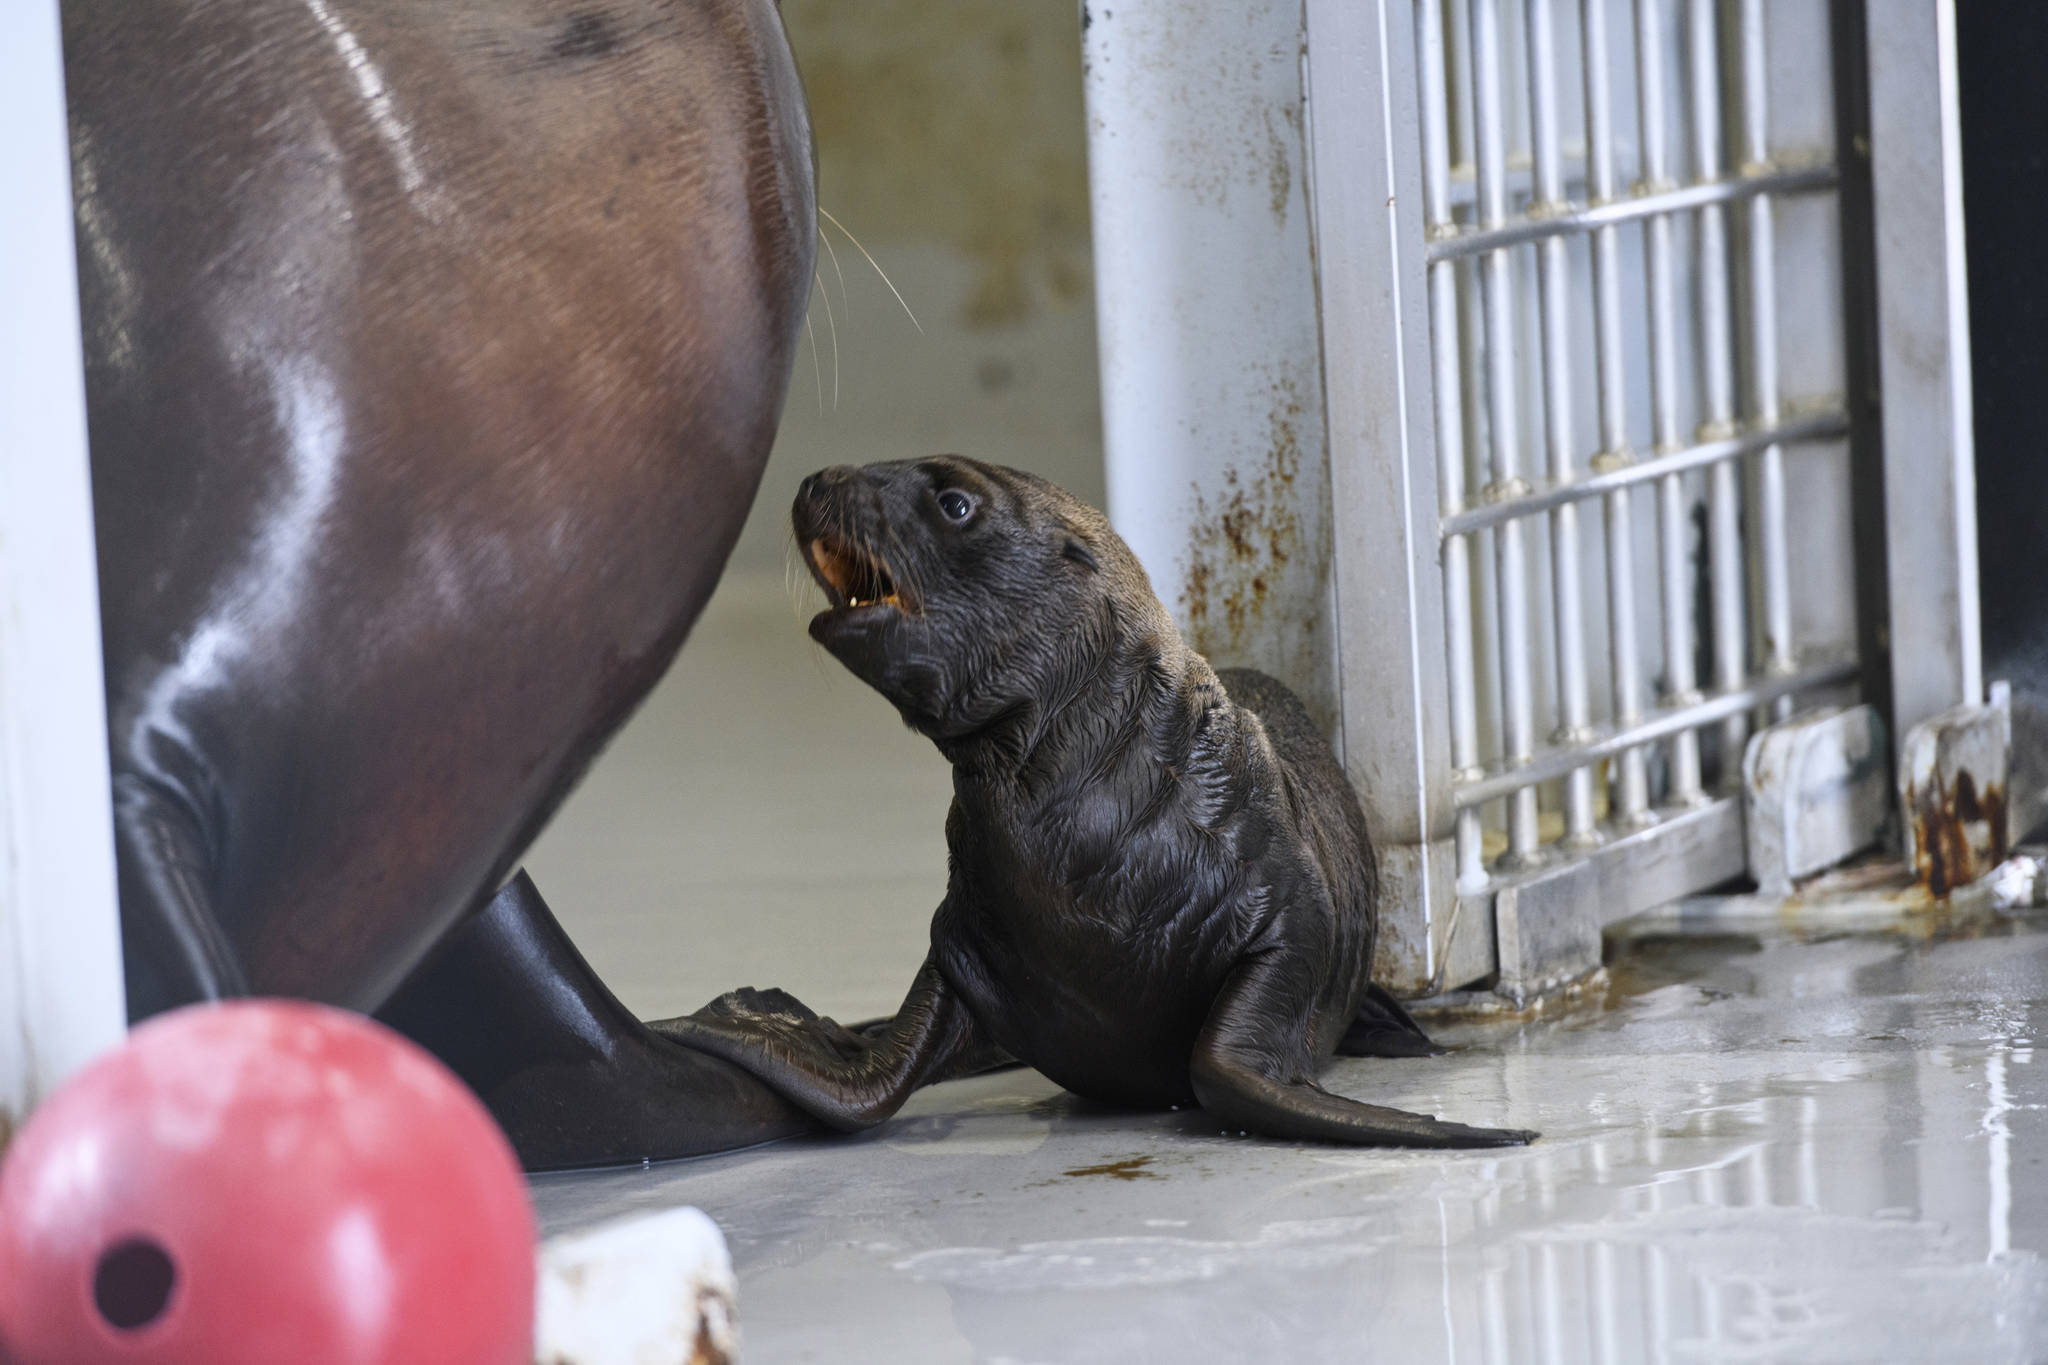 A female Steller sea lion pup, sticks close to her mother, Mara, at the Alaska SeaLife Center, July 6, 2020, in Seward, Alaska. Zoos and aquariums from Florida to Alaska are struggling financially because of closures due to the coronavirus pandemic. Three-quarters of past visitors to the Alaska SeaLife Center, an aquarium and research center that runs Alaska’s only marine mammal rescue program, have been tourists who arrive by plane or cruise ship. With most cruises canceled, there are few people to see the octopus, and the site’s rare Steller sea lions. (Marc Lester / Anchorage Daily News)